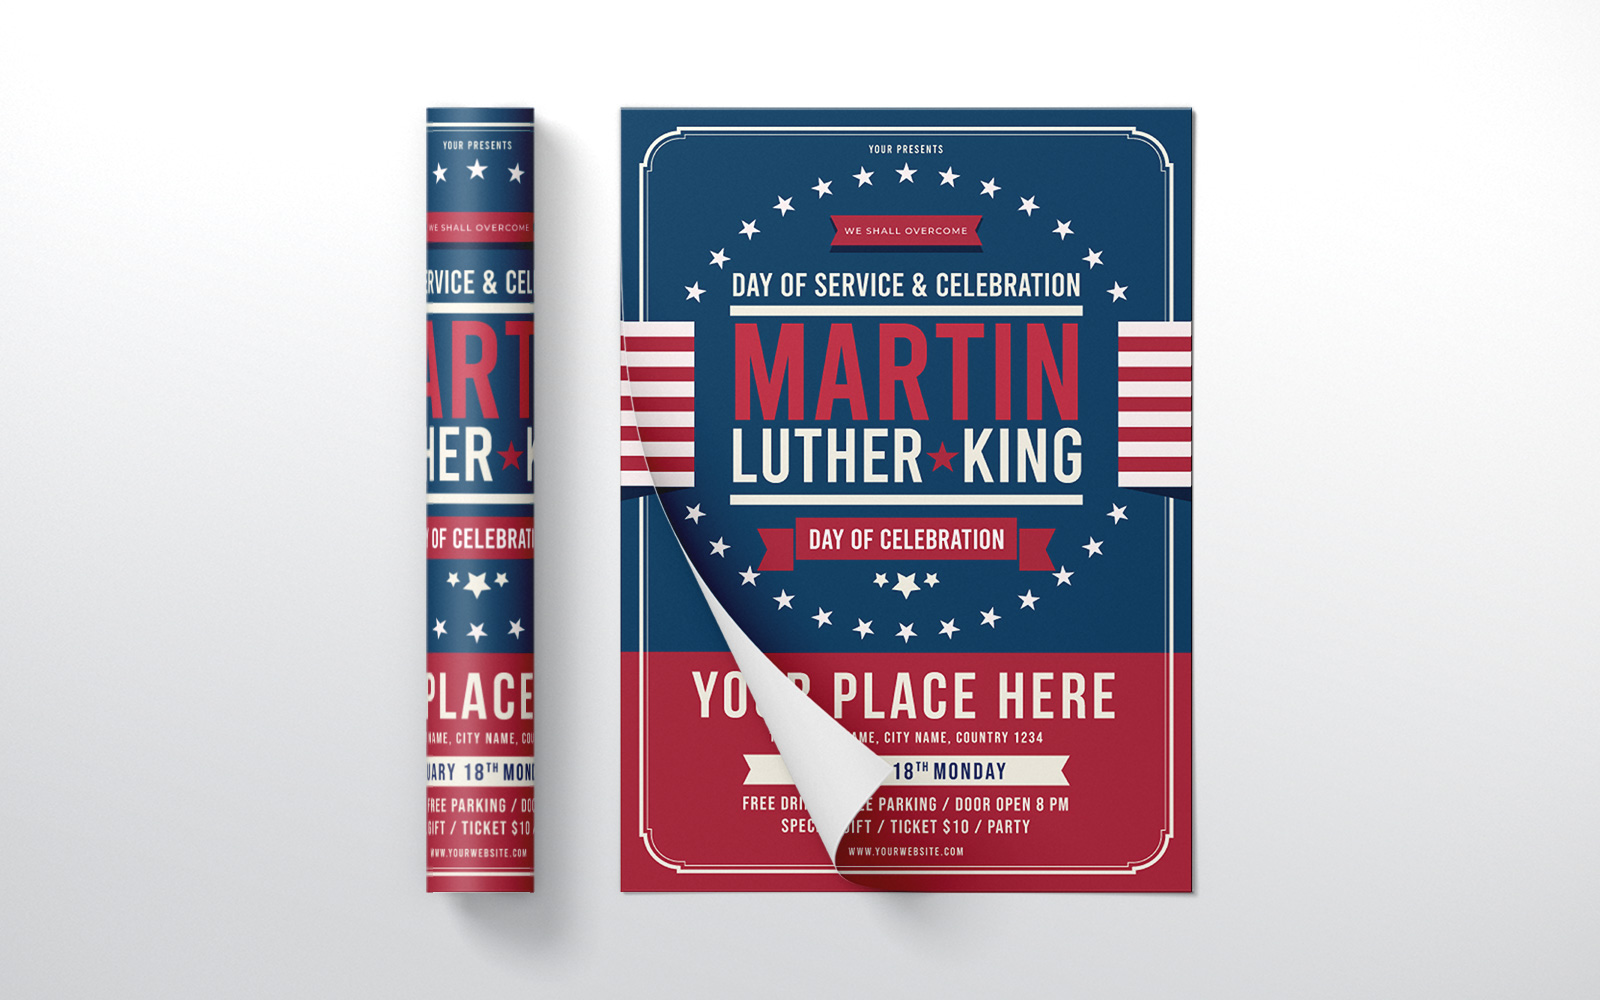 Martin Luther King - Corporate Identity Template